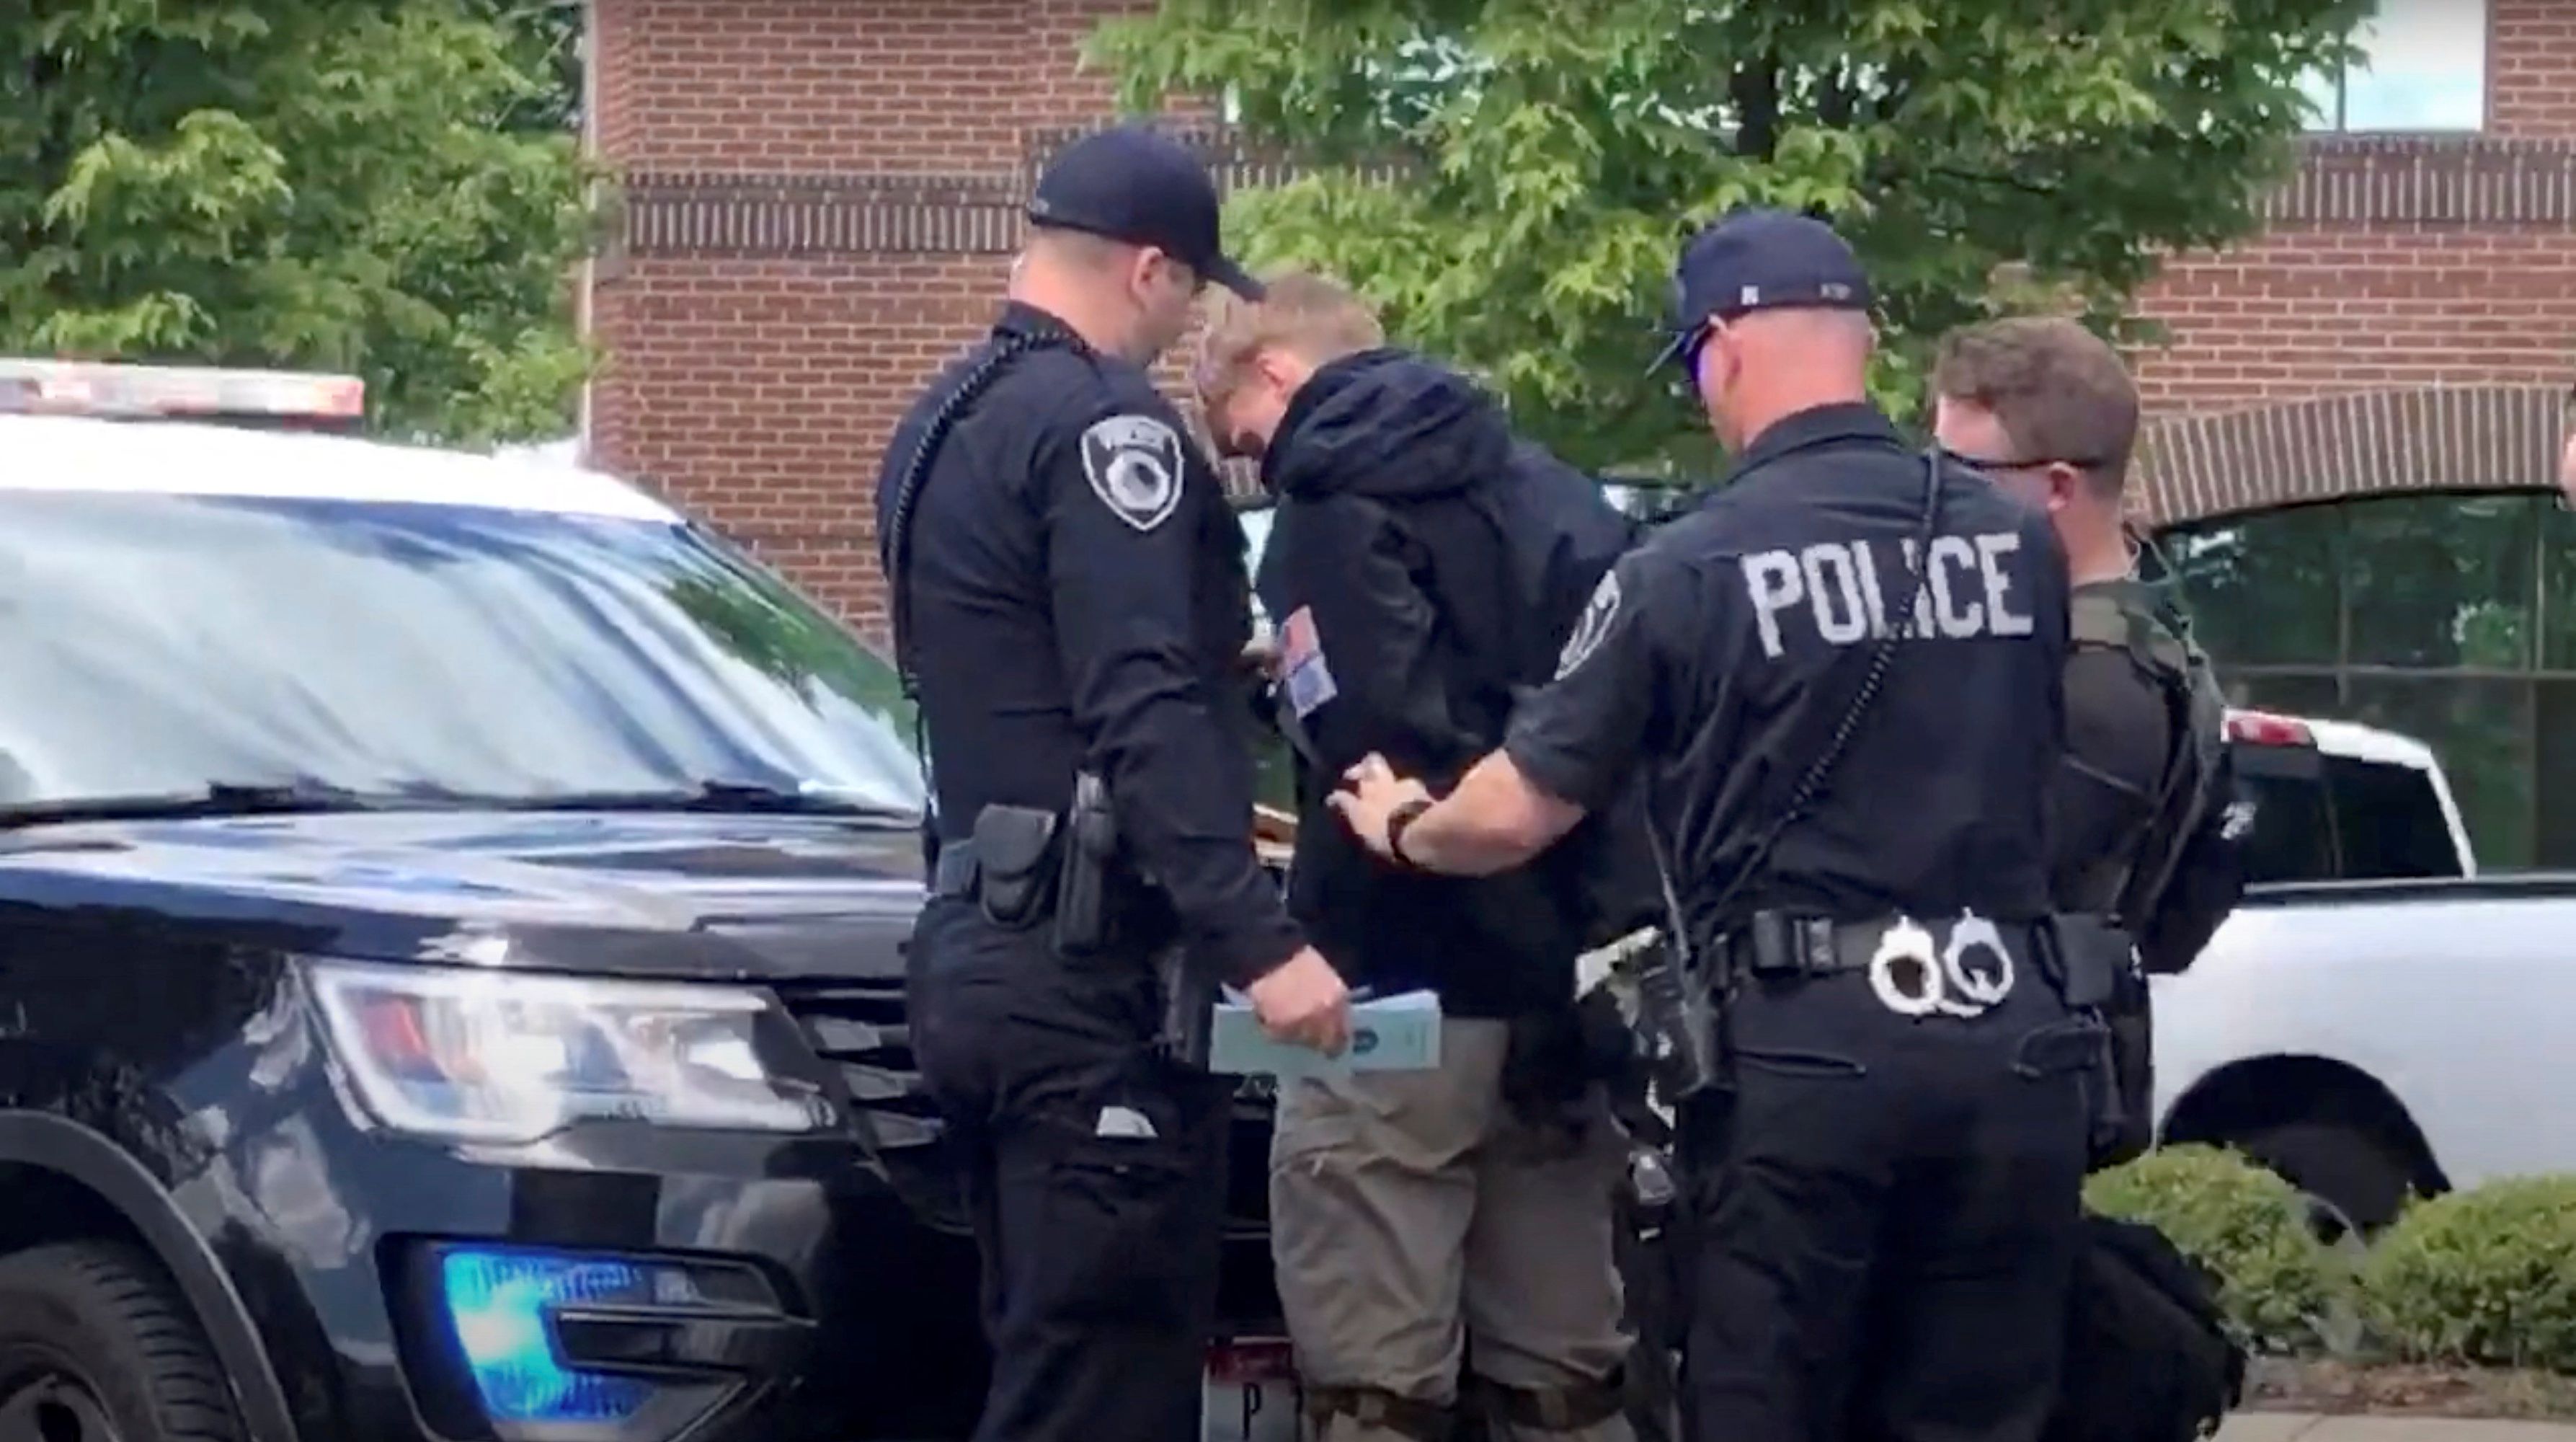 A man is detained as police in riot gear protect a group of men, who police say are among 31 arrested for conspiracy to riot and are affiliated with the Patriotic Front group, after they were found in the back of a van U Haul in the near of a Pride event in Coeur d'Alene, Idaho, USA